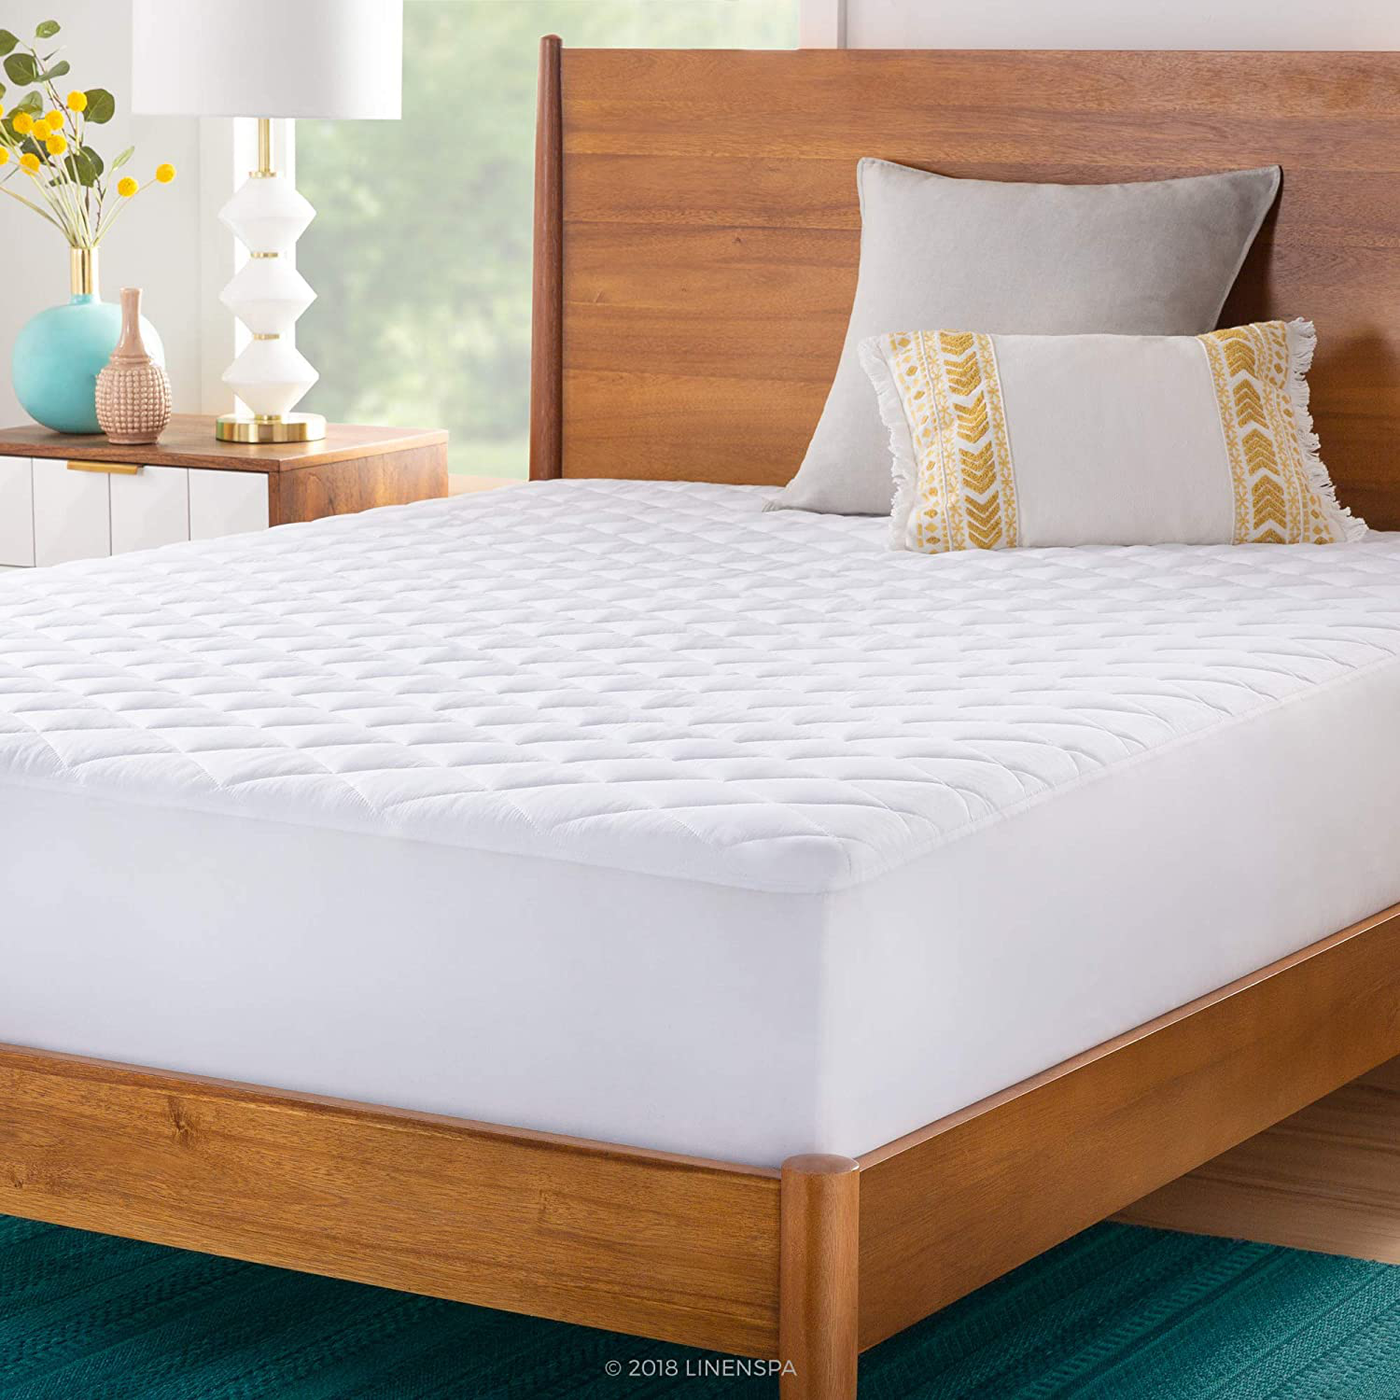 Linenspa Plush Quilted Hypoallergenic Mattress Pad-Breathable Mattress Cover with Deep Pockets Stretches up to 18 Inches